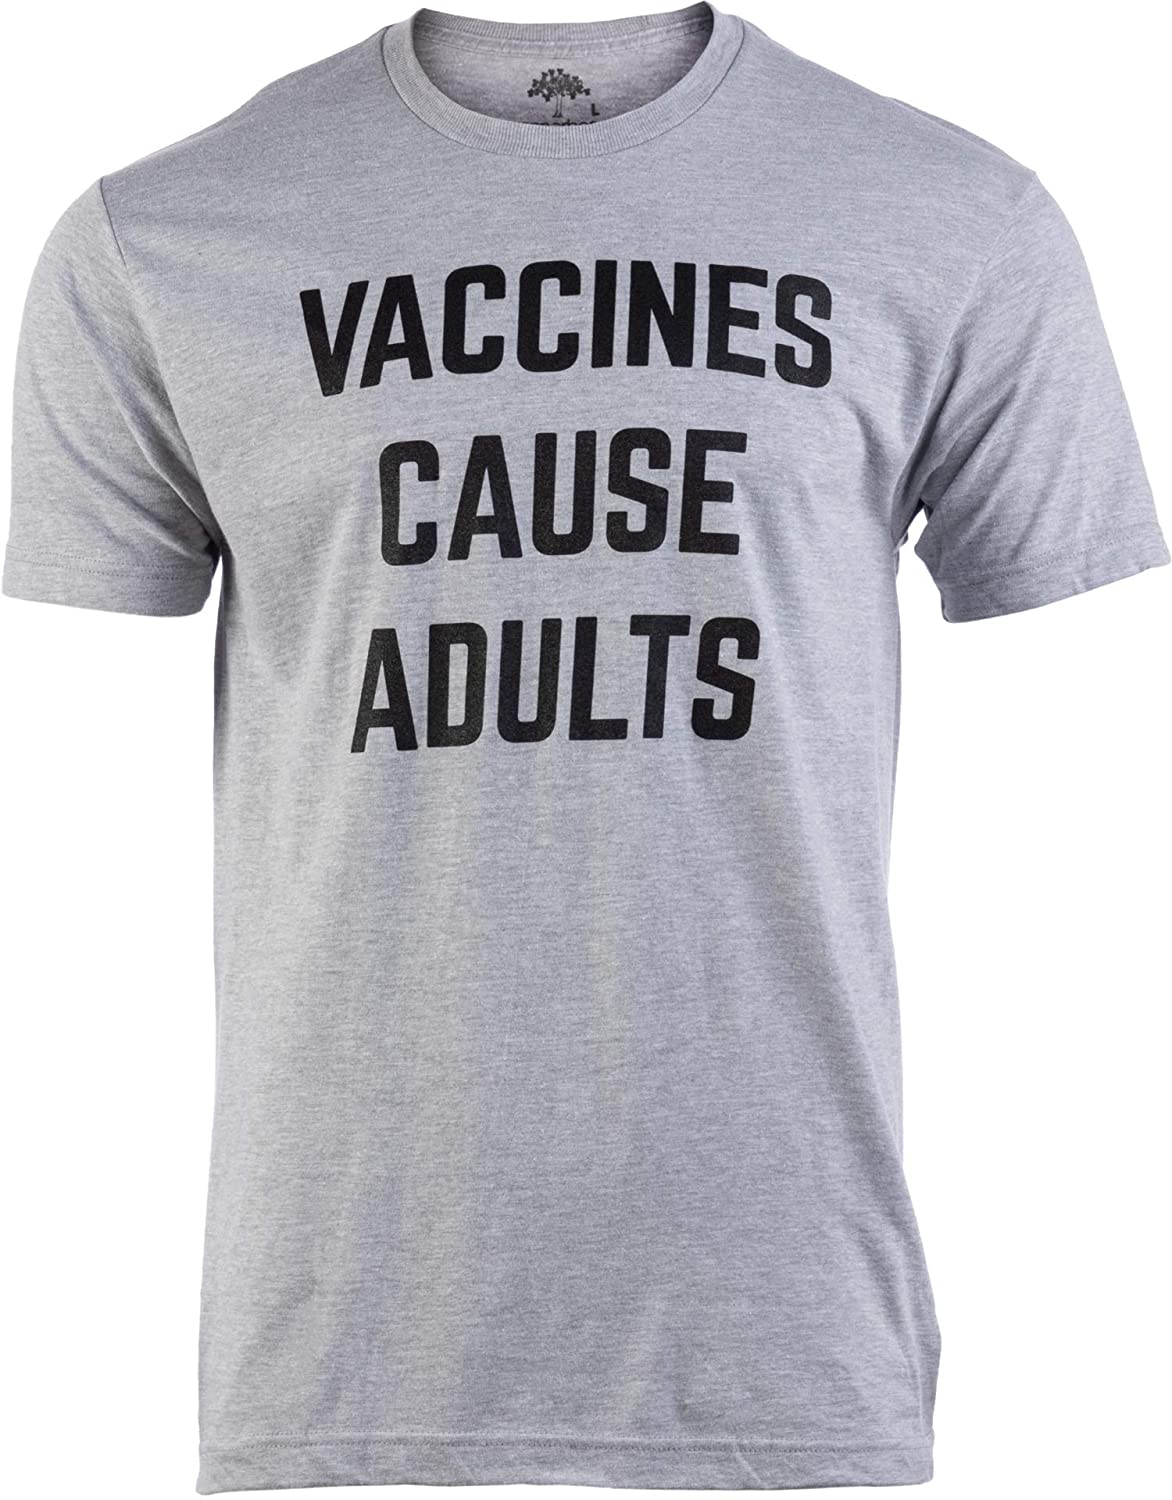 Vaccines Cause Adults | Funny Pro Science Doctor Nurse Medical Humor T-Shirt for Men